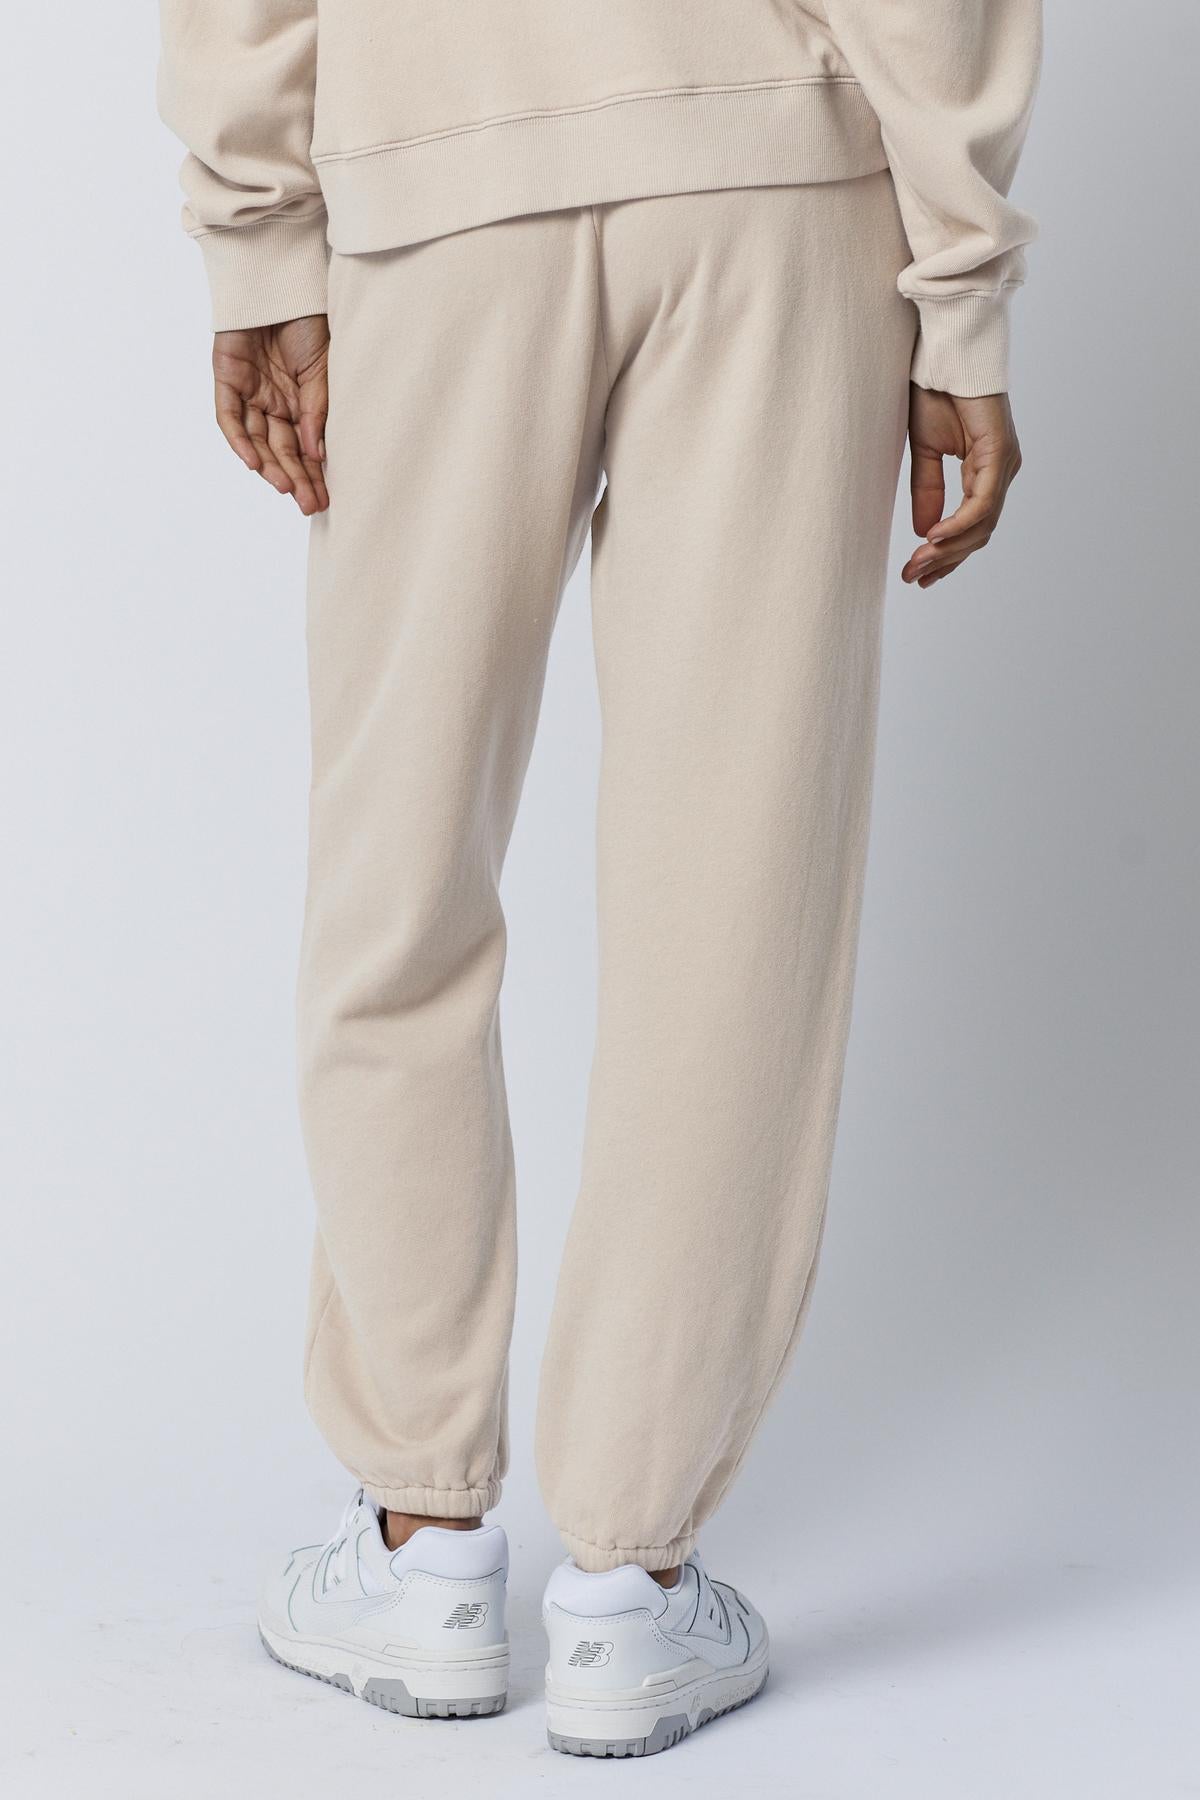 Person wearing ZUMA SWEATPANT by Velvet by Jenny Graham and a matching sweatshirt with white sneakers, standing against a plain background, focus on lower half.-36863305351361